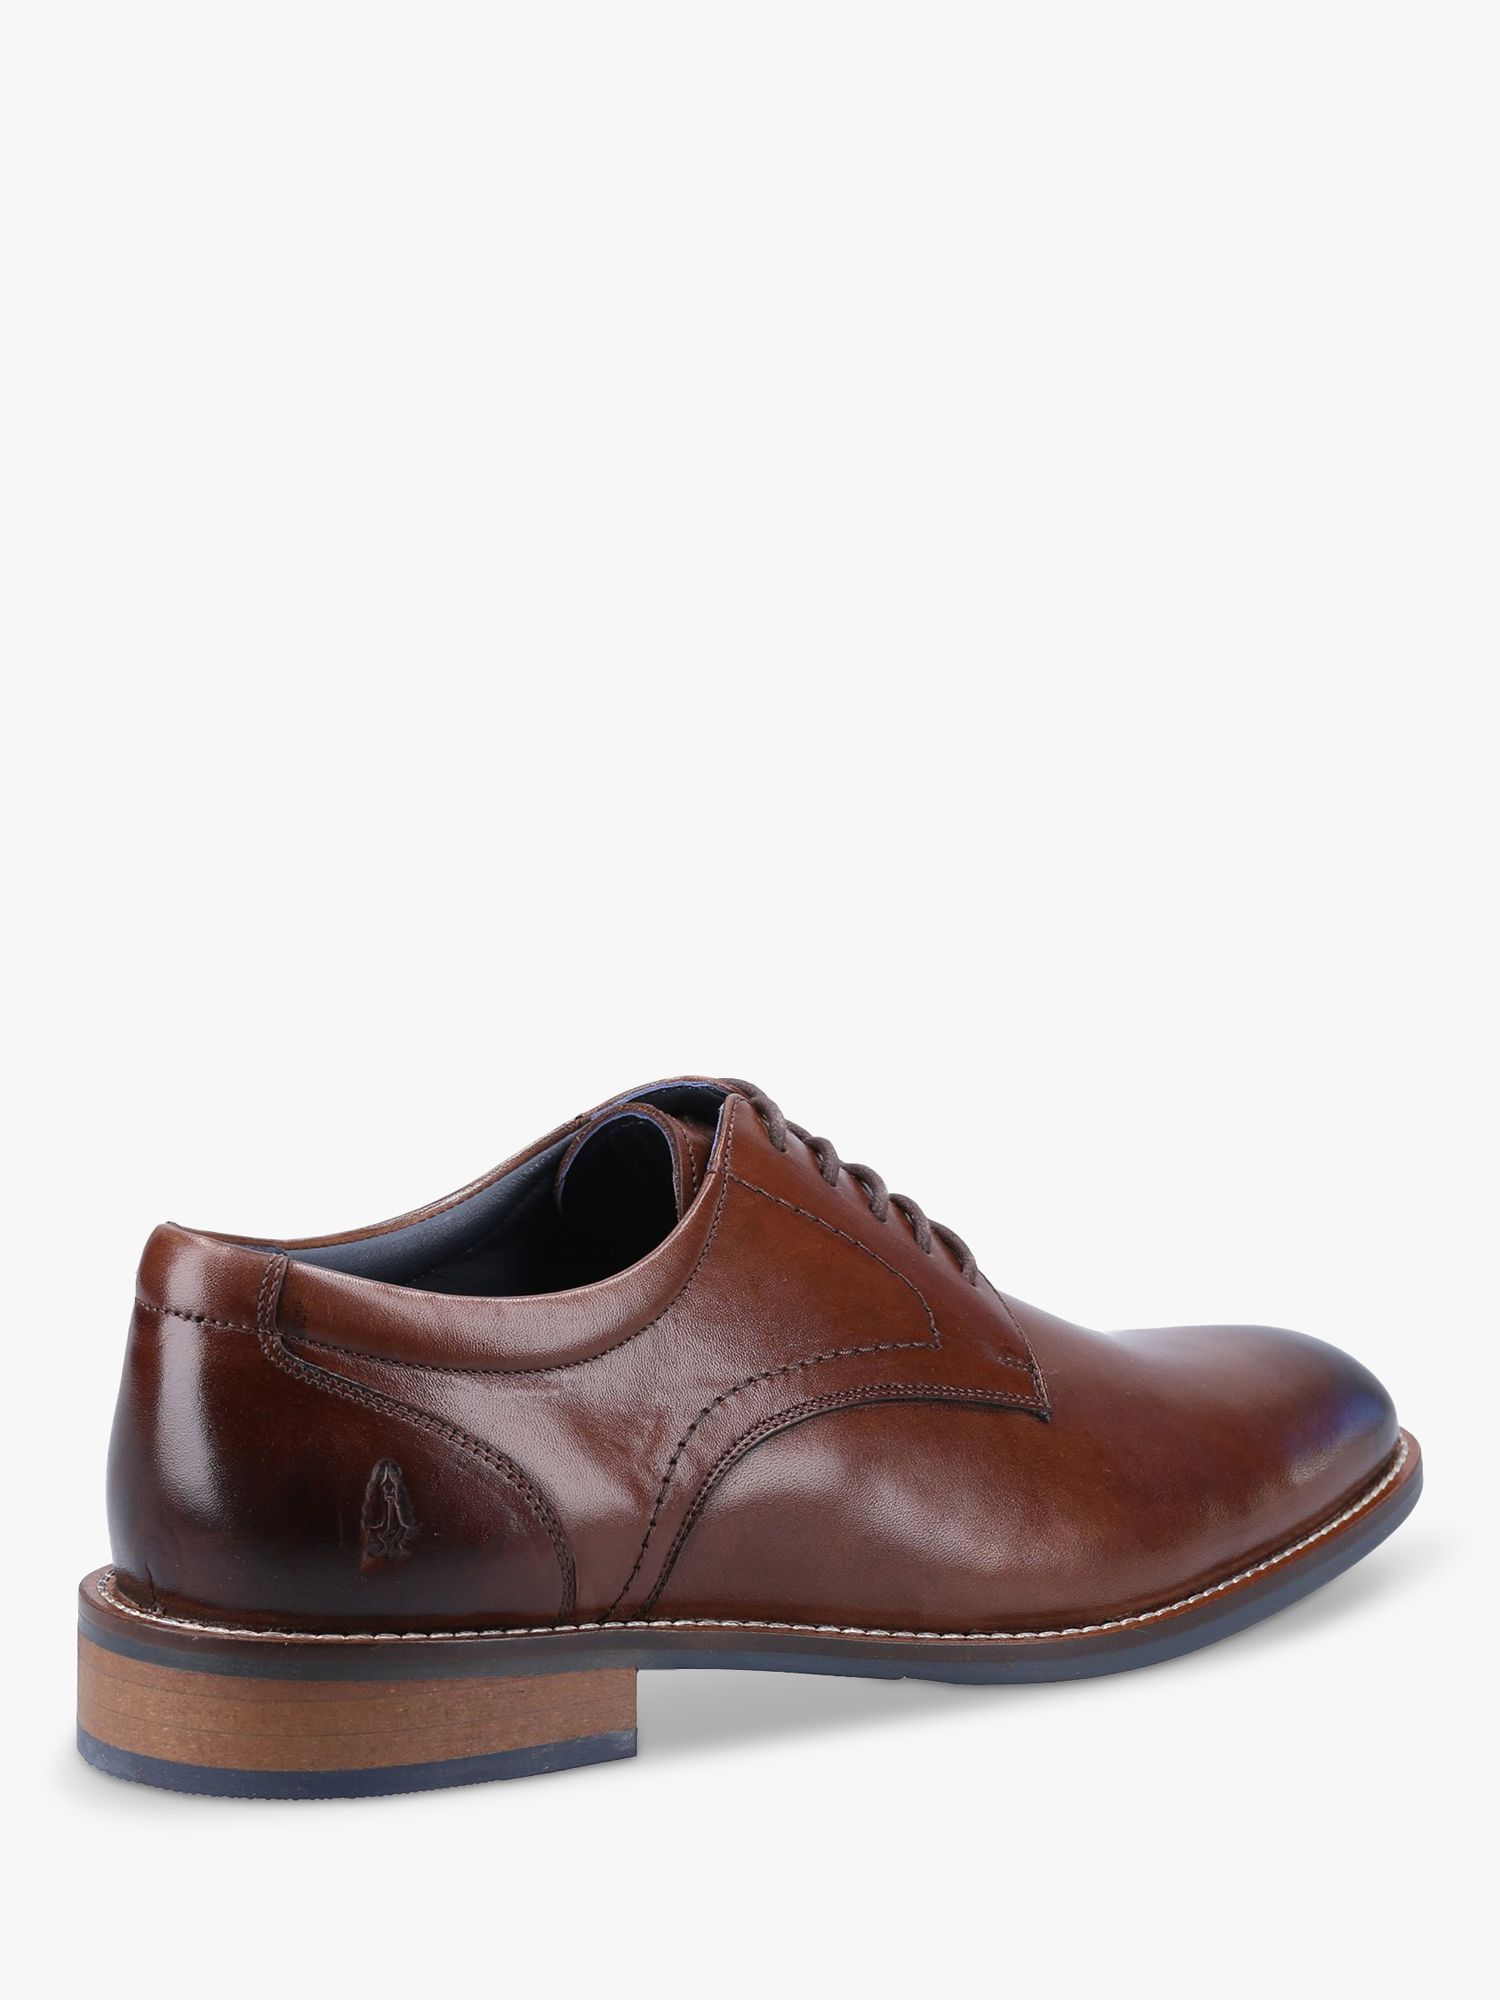 Hush Puppies Damien Leather Derby Shoes, Chocolate at John Lewis & Partners